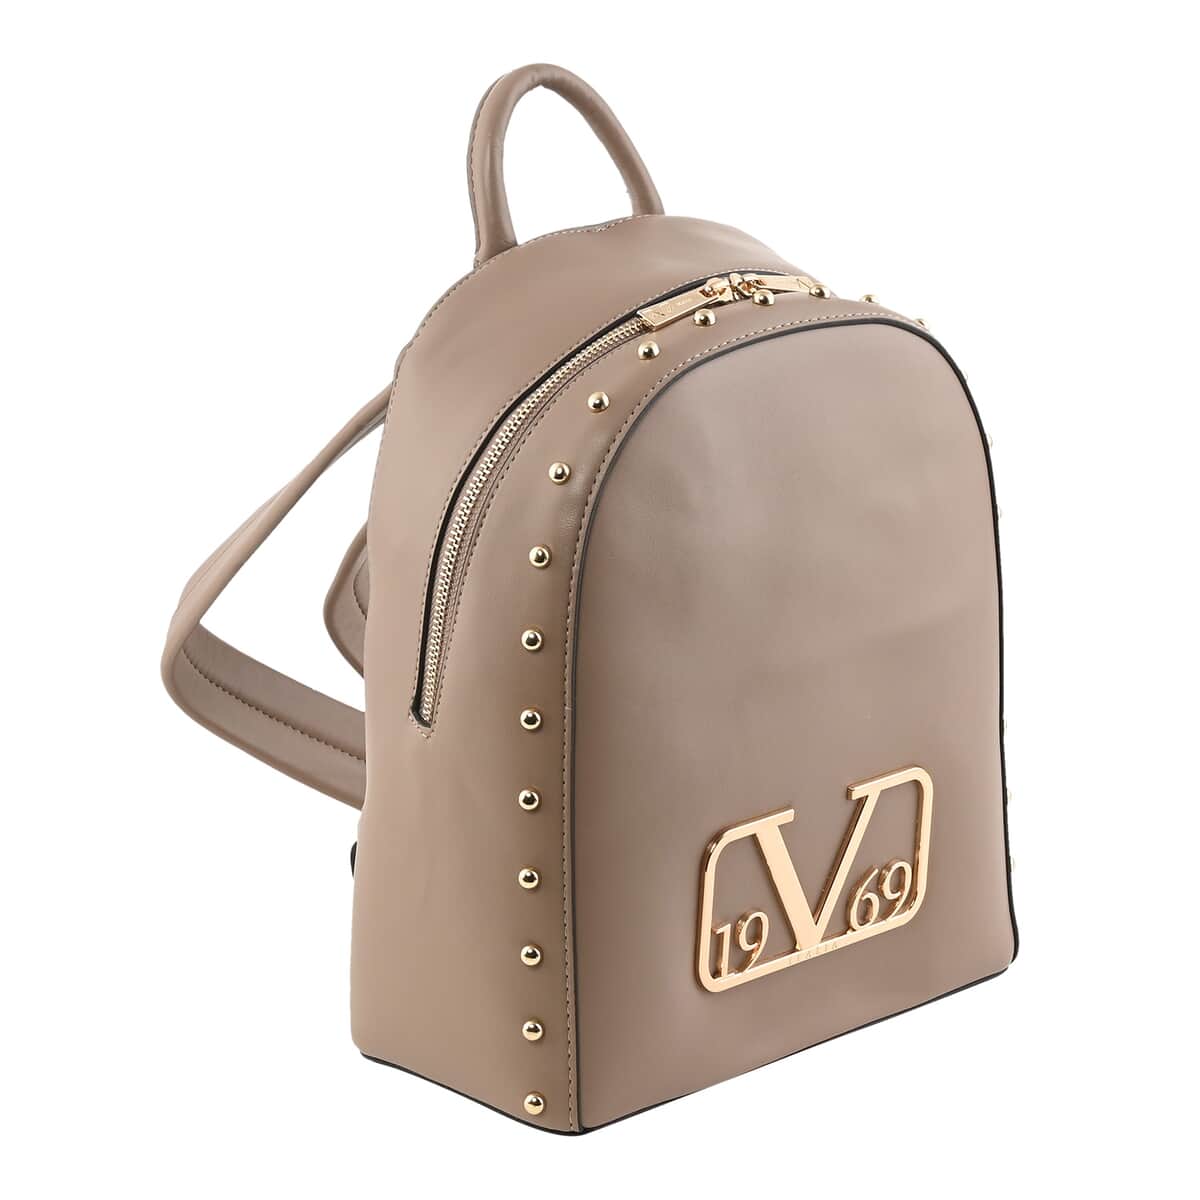 19V69 ITALIA by Alessandro Versace Smooth Texture Faux Leather Backpack with Detachable Strap - Beige (12X9.5X4.75) image number 2